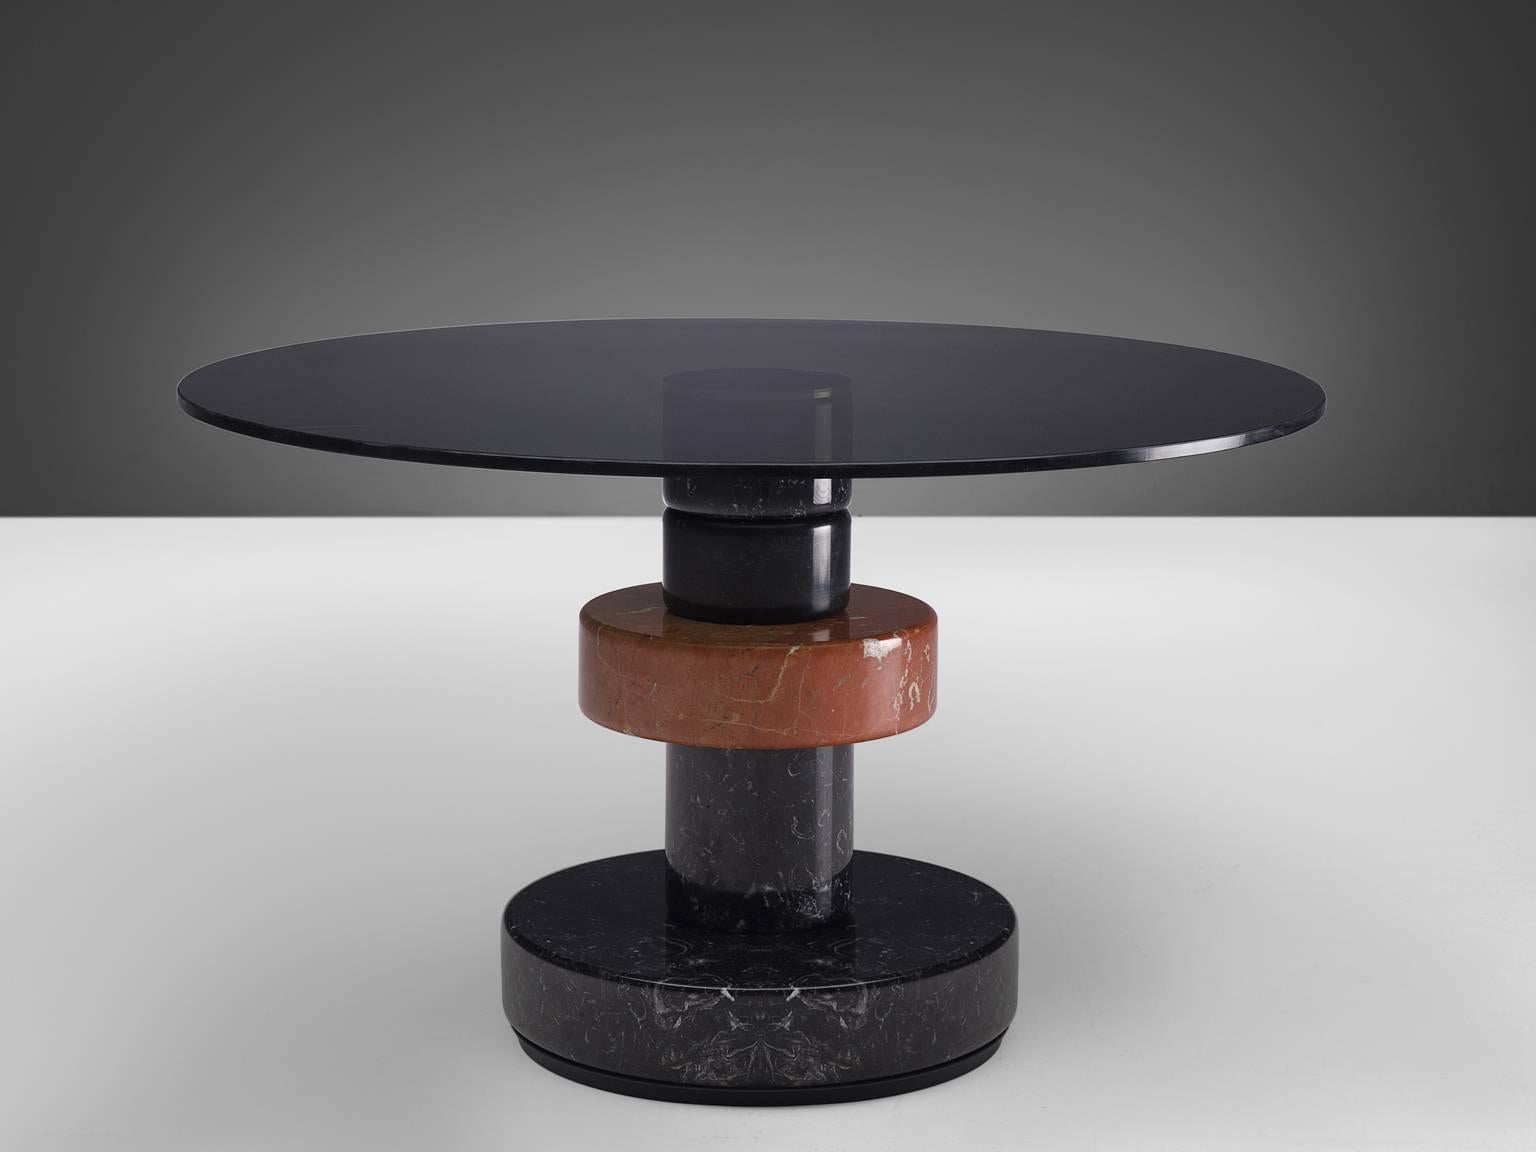 Lodovico Acerbis and Giotto Stoppino for Acerbis International, table model 'Menhir', in marble, stainless steel and glass, Italy, 1983.

This well designed table was part of the 